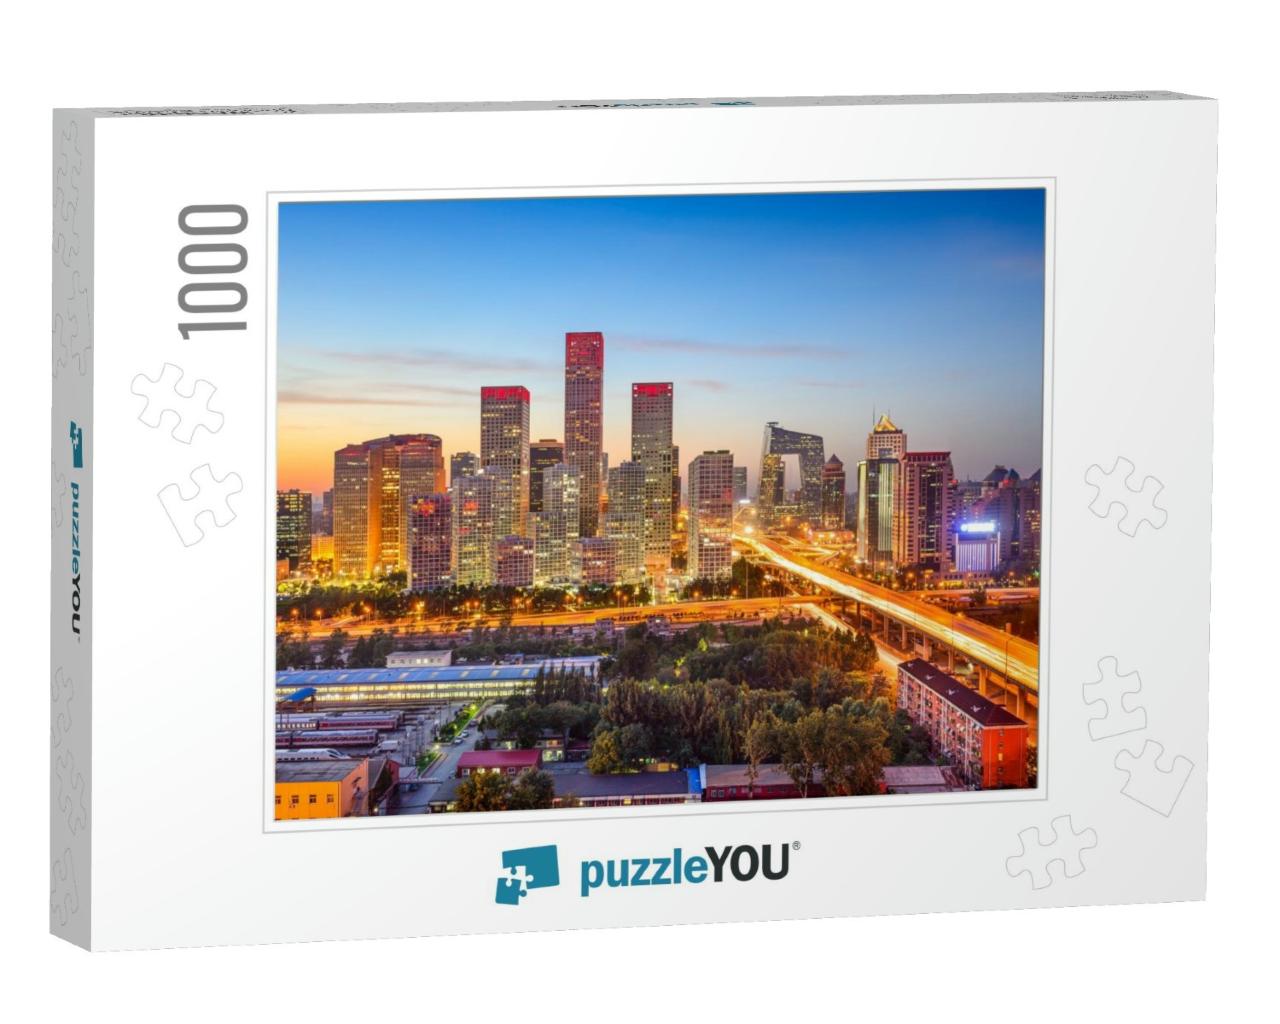 Beijing, China Cbd Skyline At Sunset... Jigsaw Puzzle with 1000 pieces